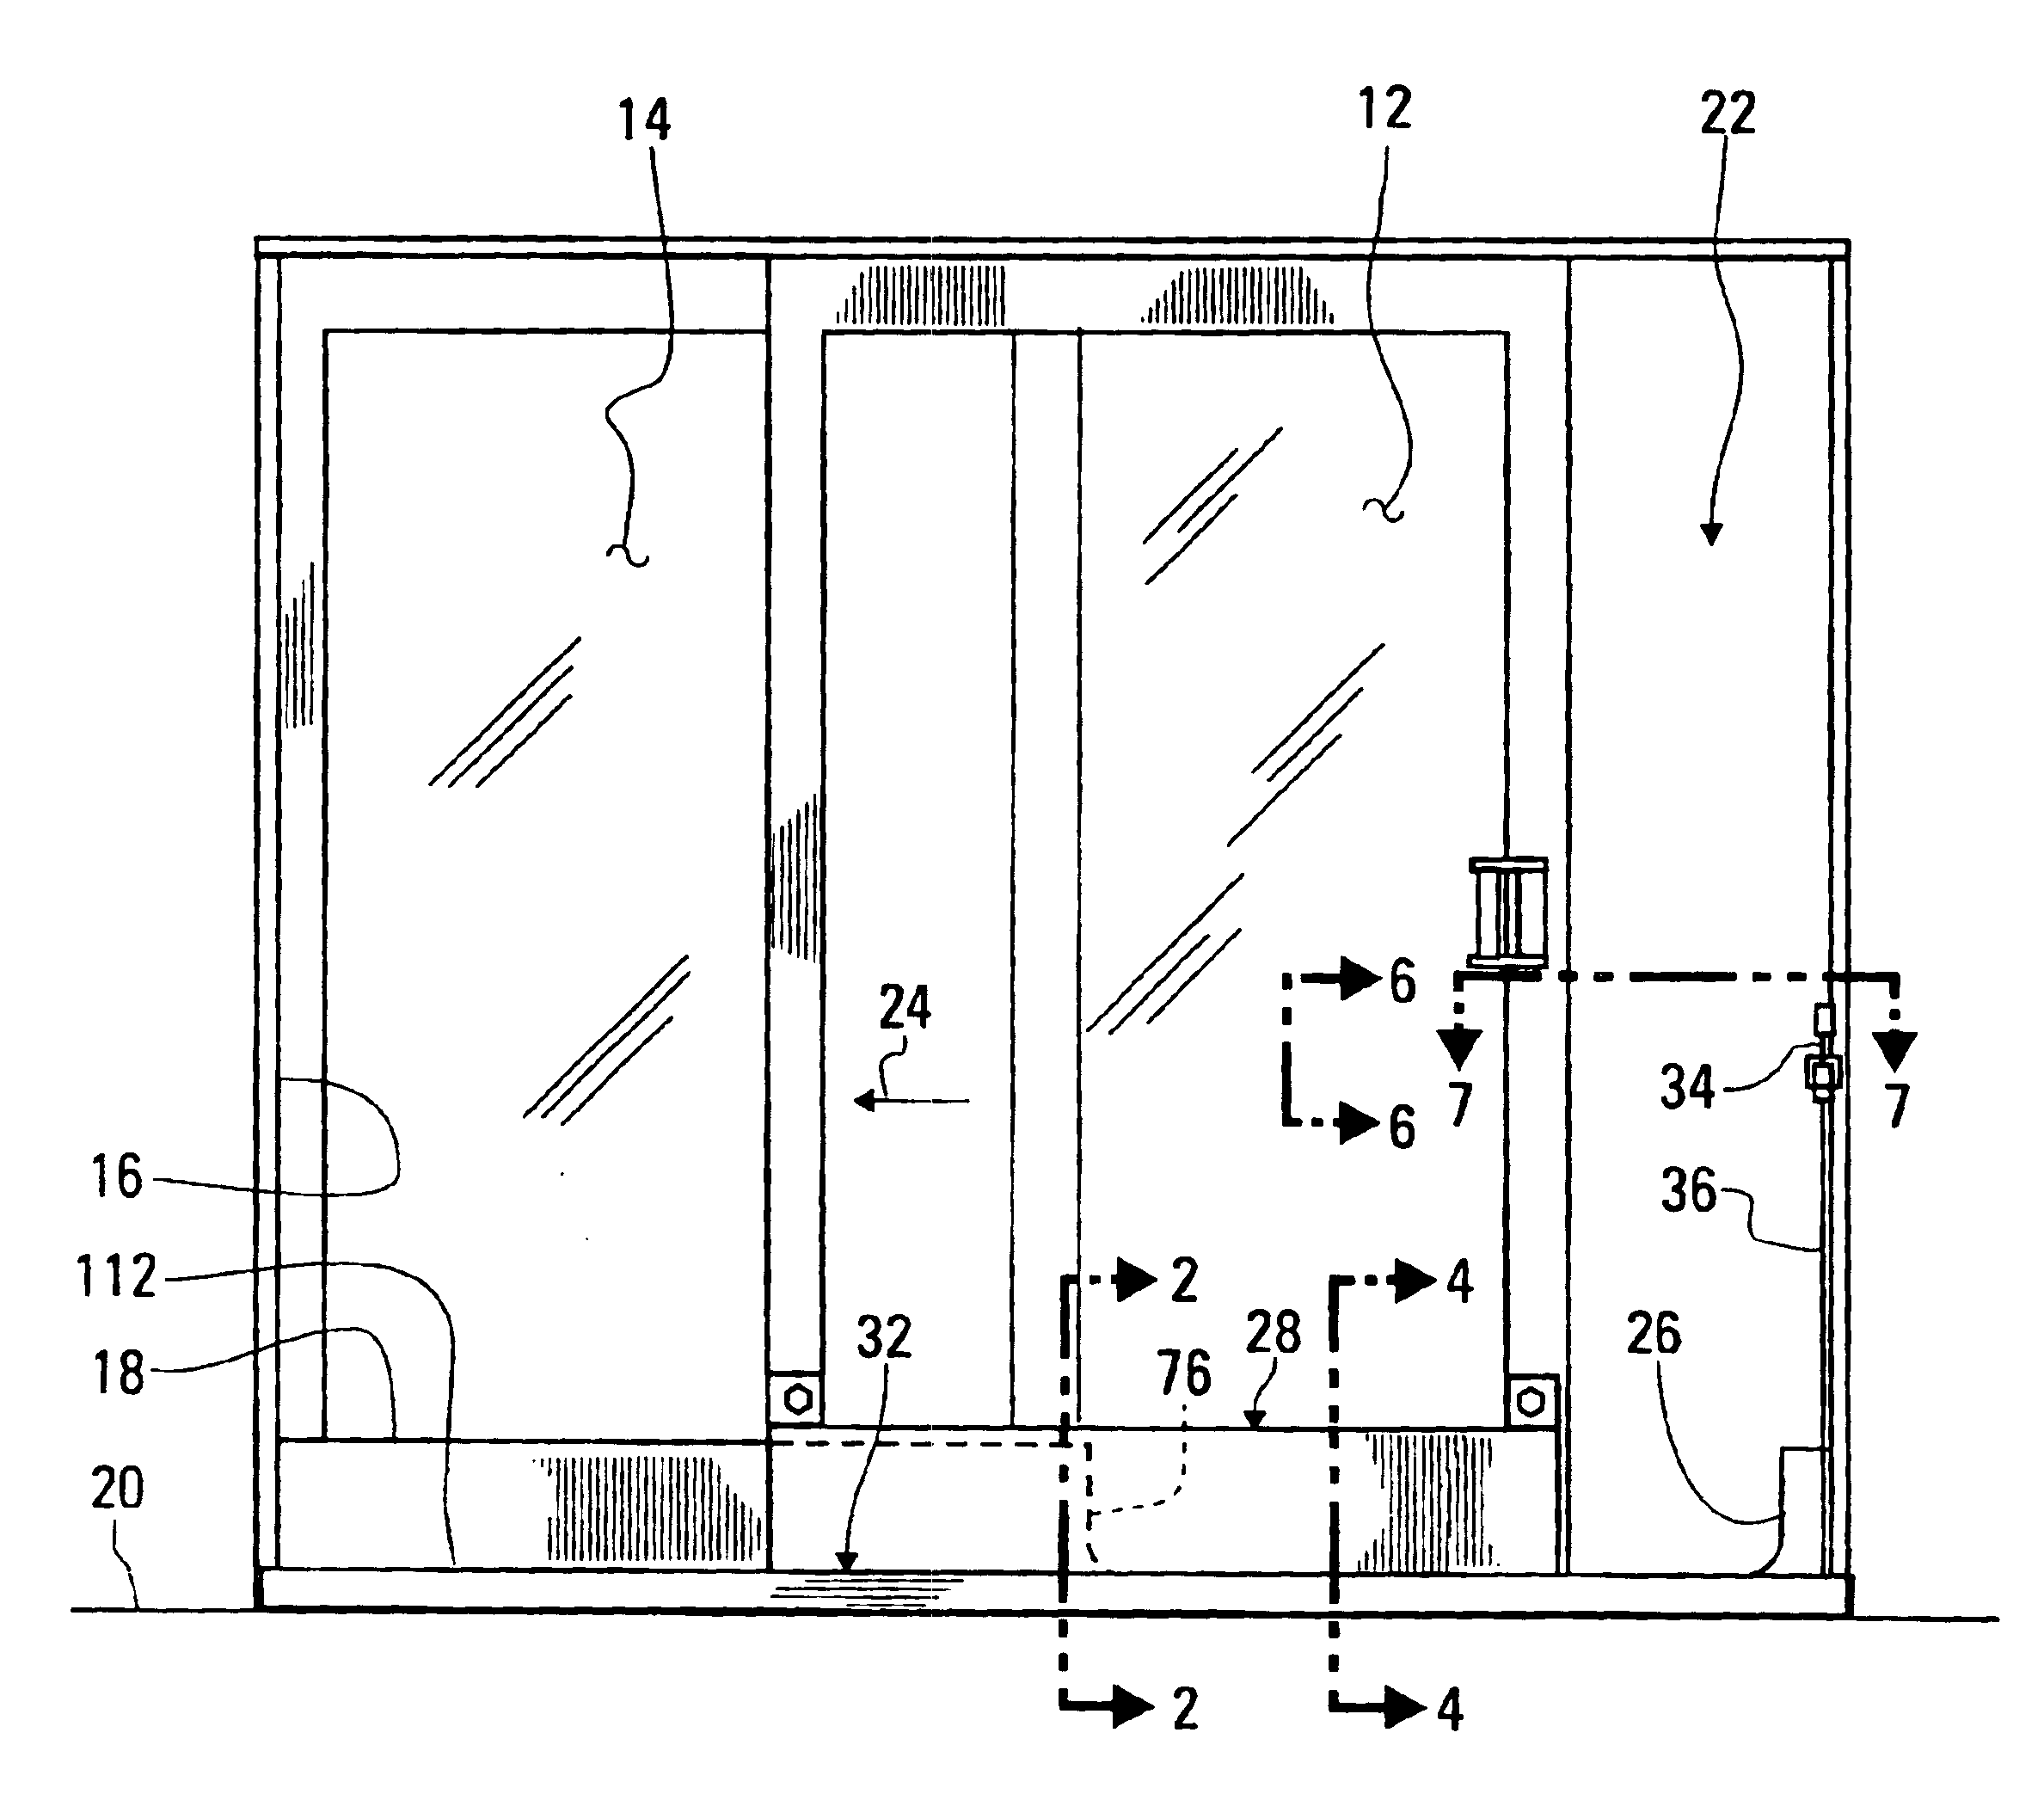 Apparatus moving with a sliding door to provide an unobstructed passageway and to seal a notch within a watertight barrier